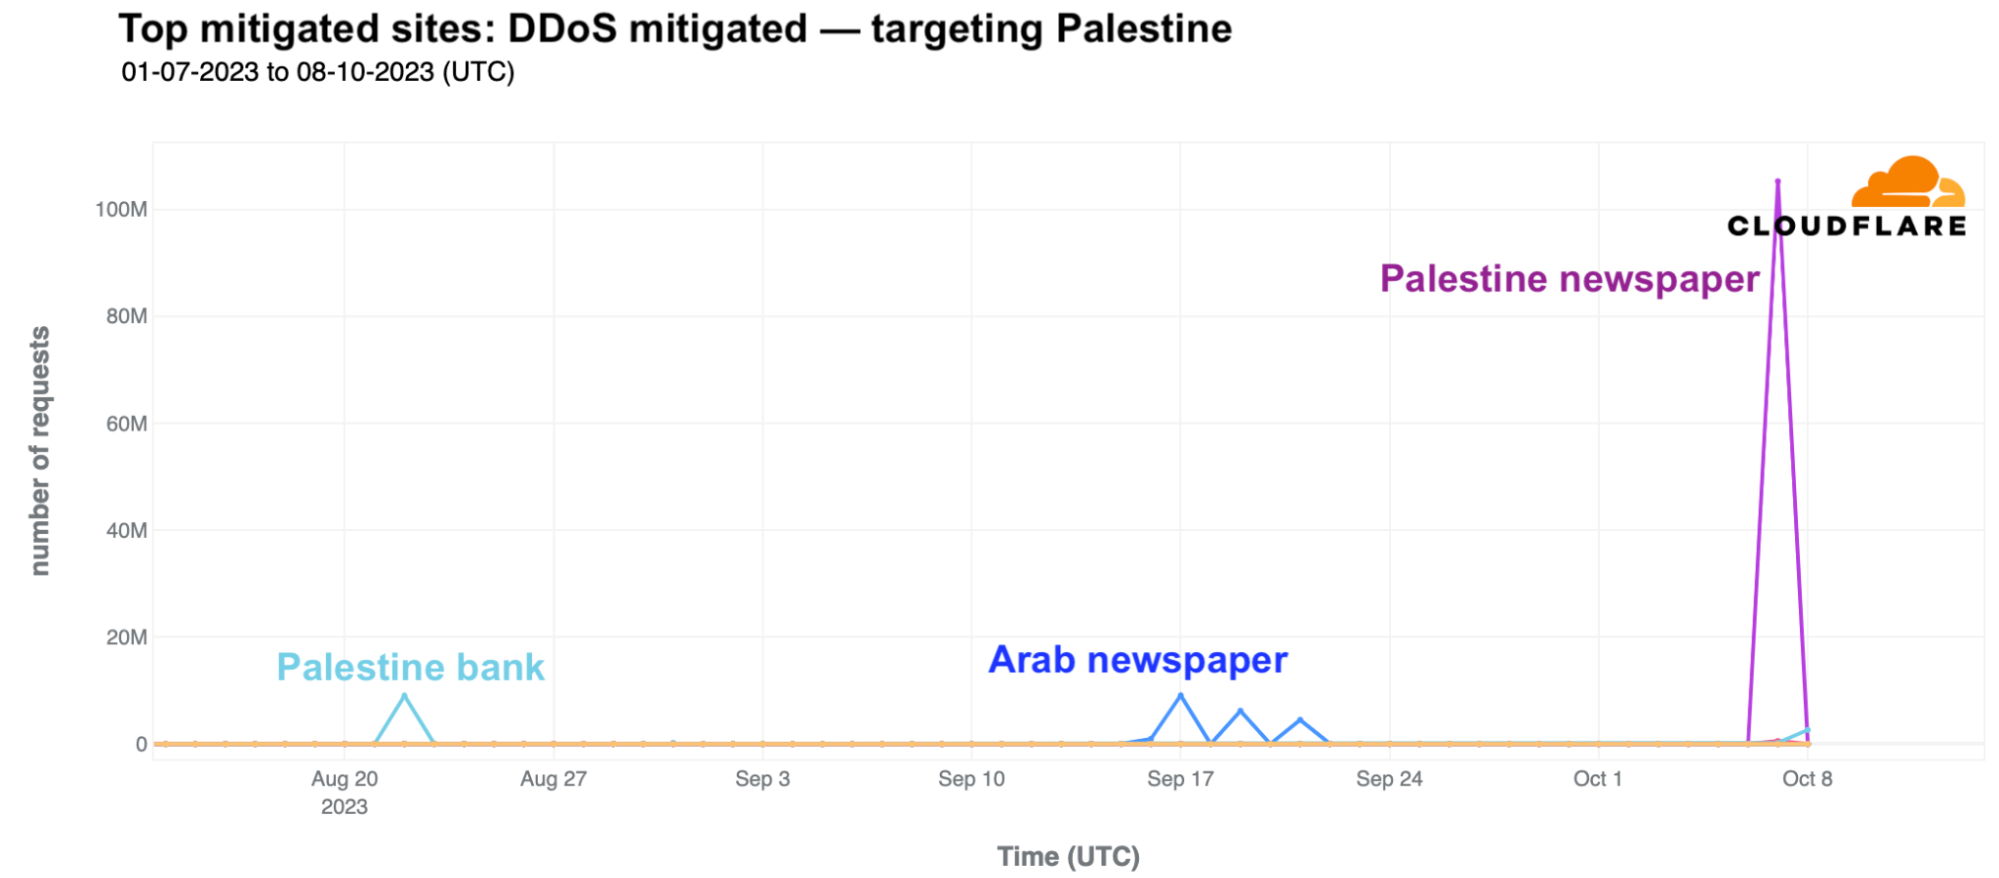 Internet traffic patterns in Israel and Palestine following the October 2023 attacks